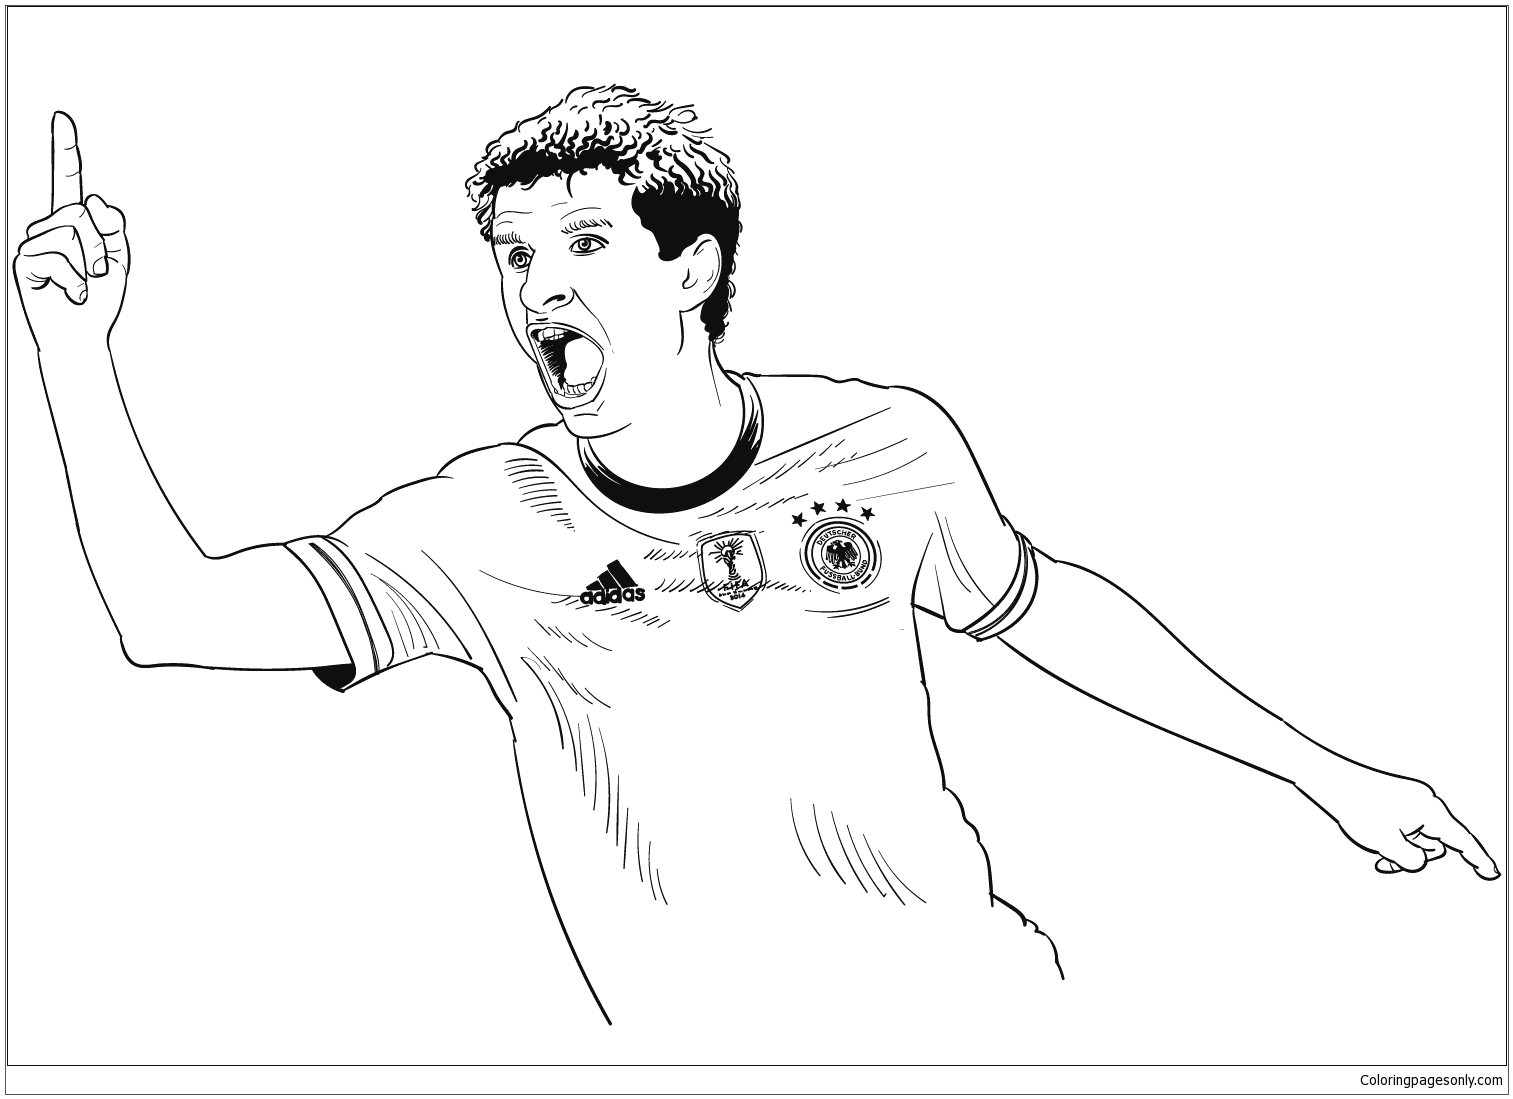 Thomas Muller-image 2 Coloring Pages